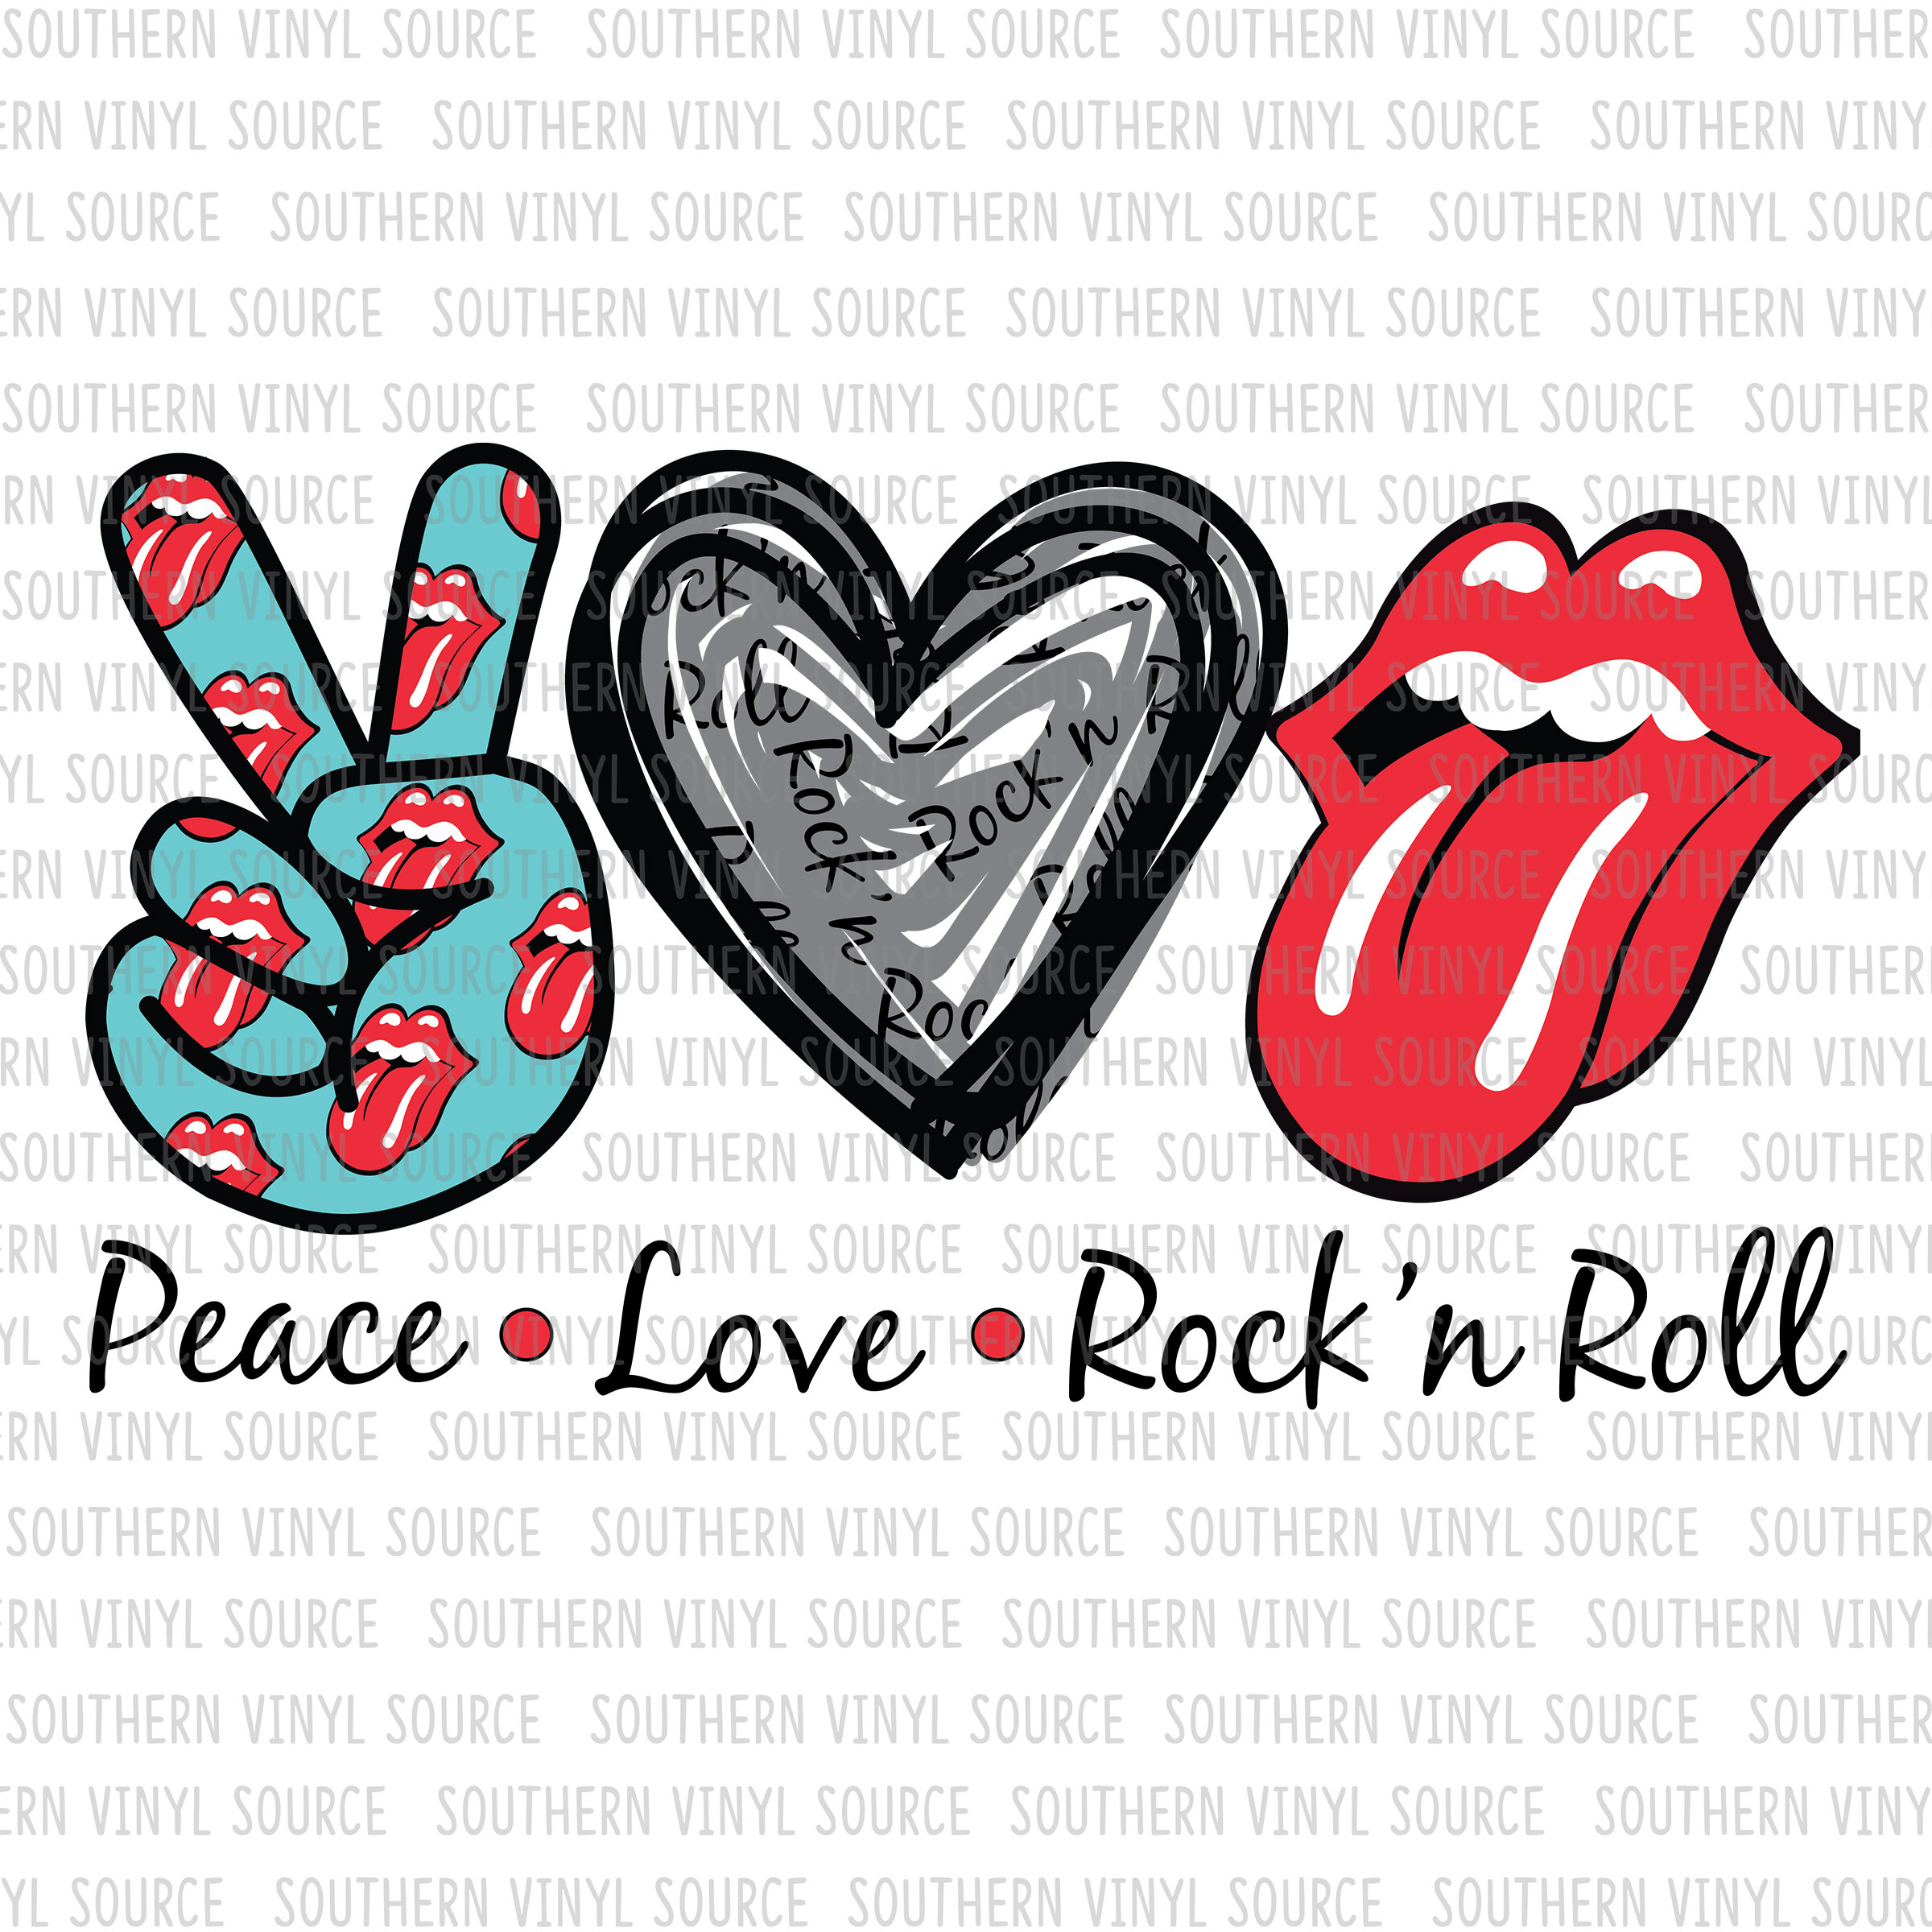 PL015 Peace Love Rock and Roll Sublimation Print — Southern Vinyl Source